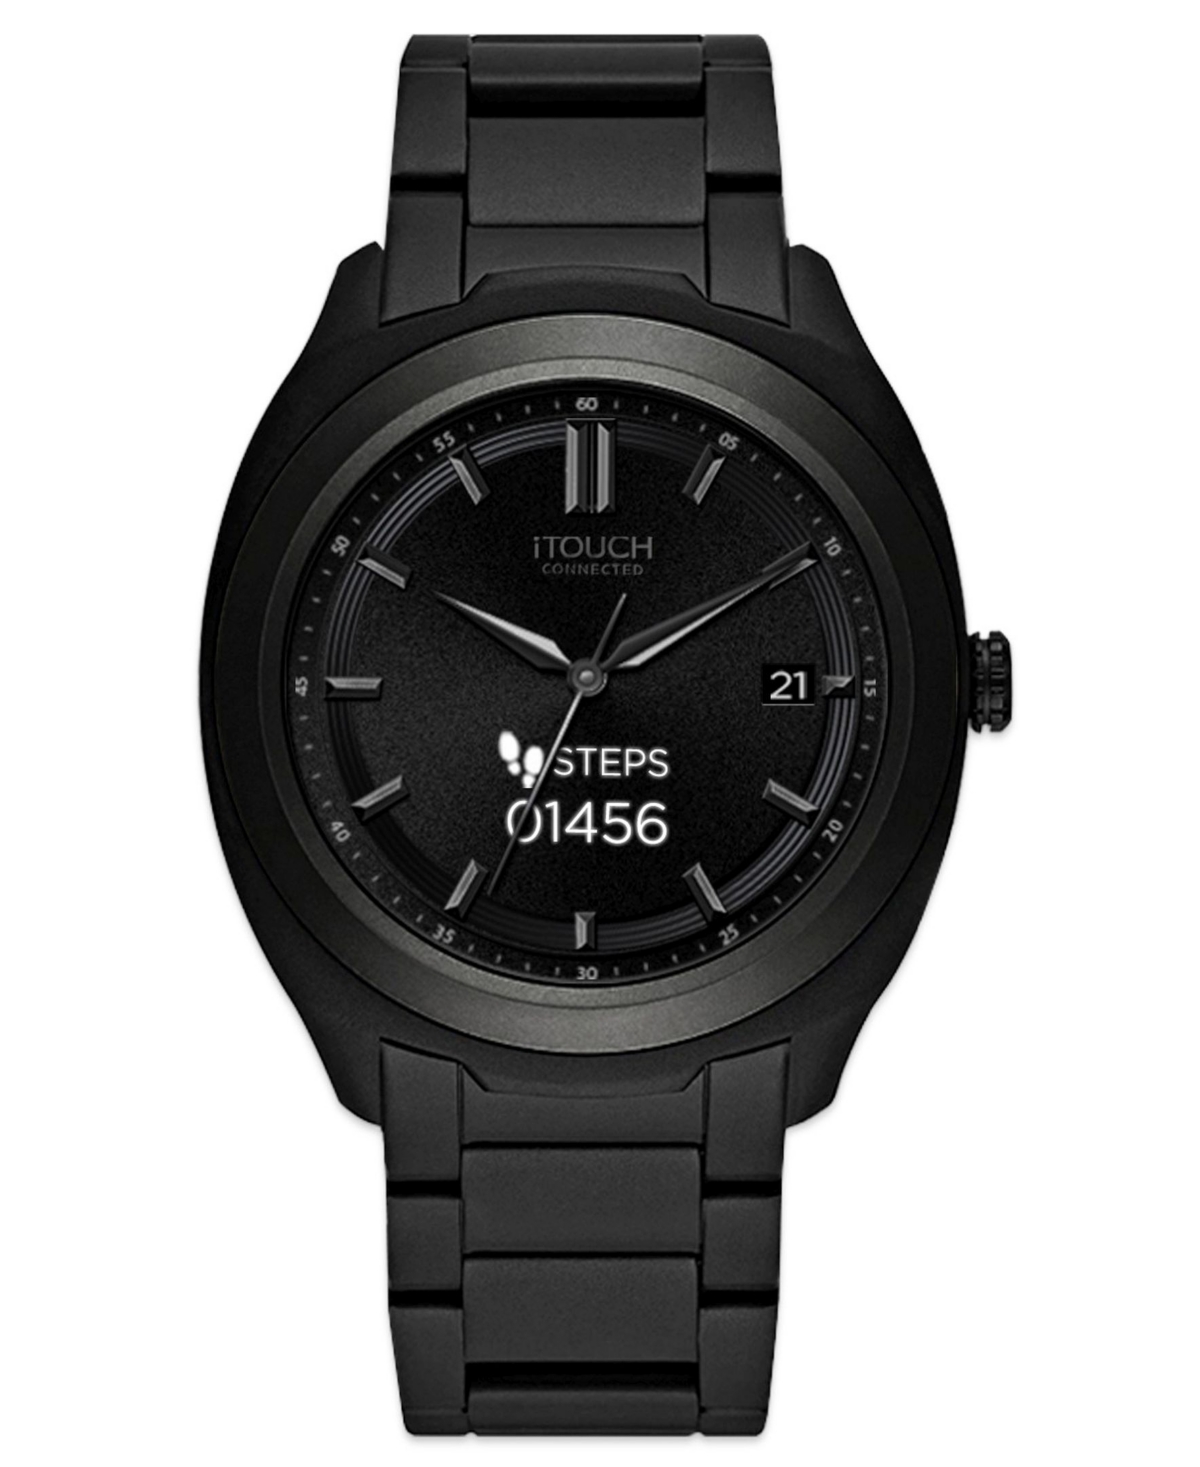 Itouch Connected Men's Hybrid Smartwatch Fitness Tracker: Black Case with Black Acrylic Strap 42mm